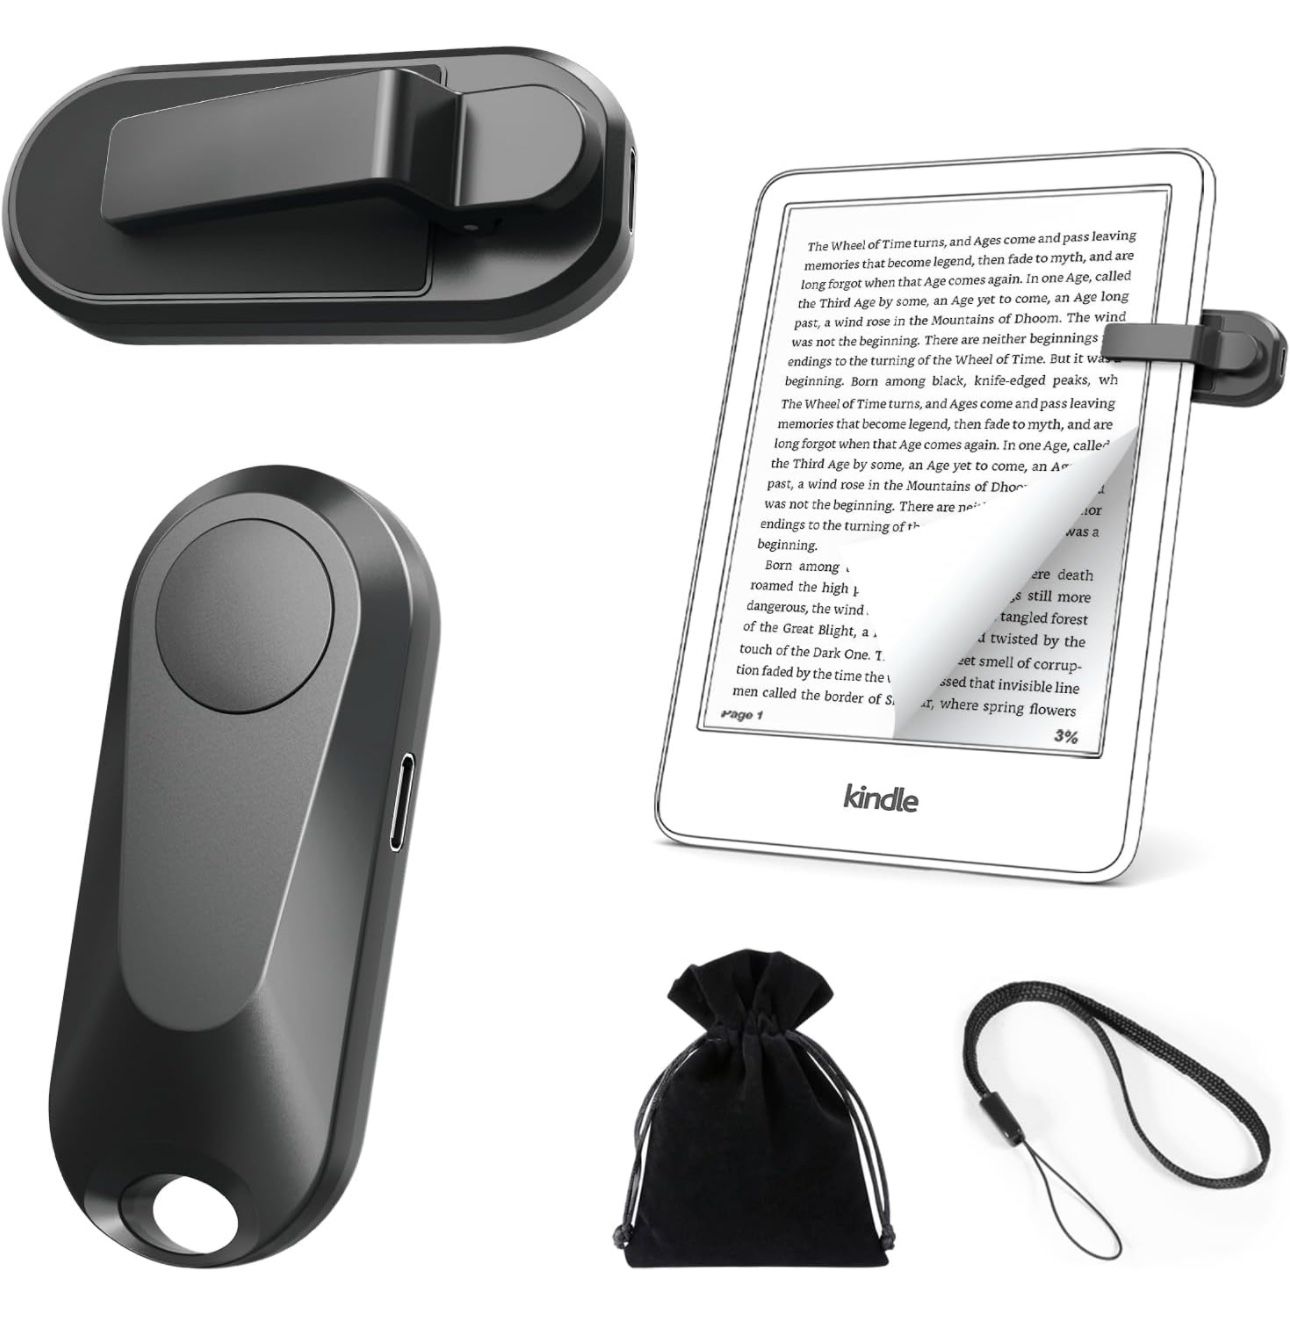 NEW Page Turner for Kindle Paperwhite,Remote Control Page Turner for Kindle Oasis Kobo iPad,Kindle Accessories for Reading in Bed Camera Remote Shutte